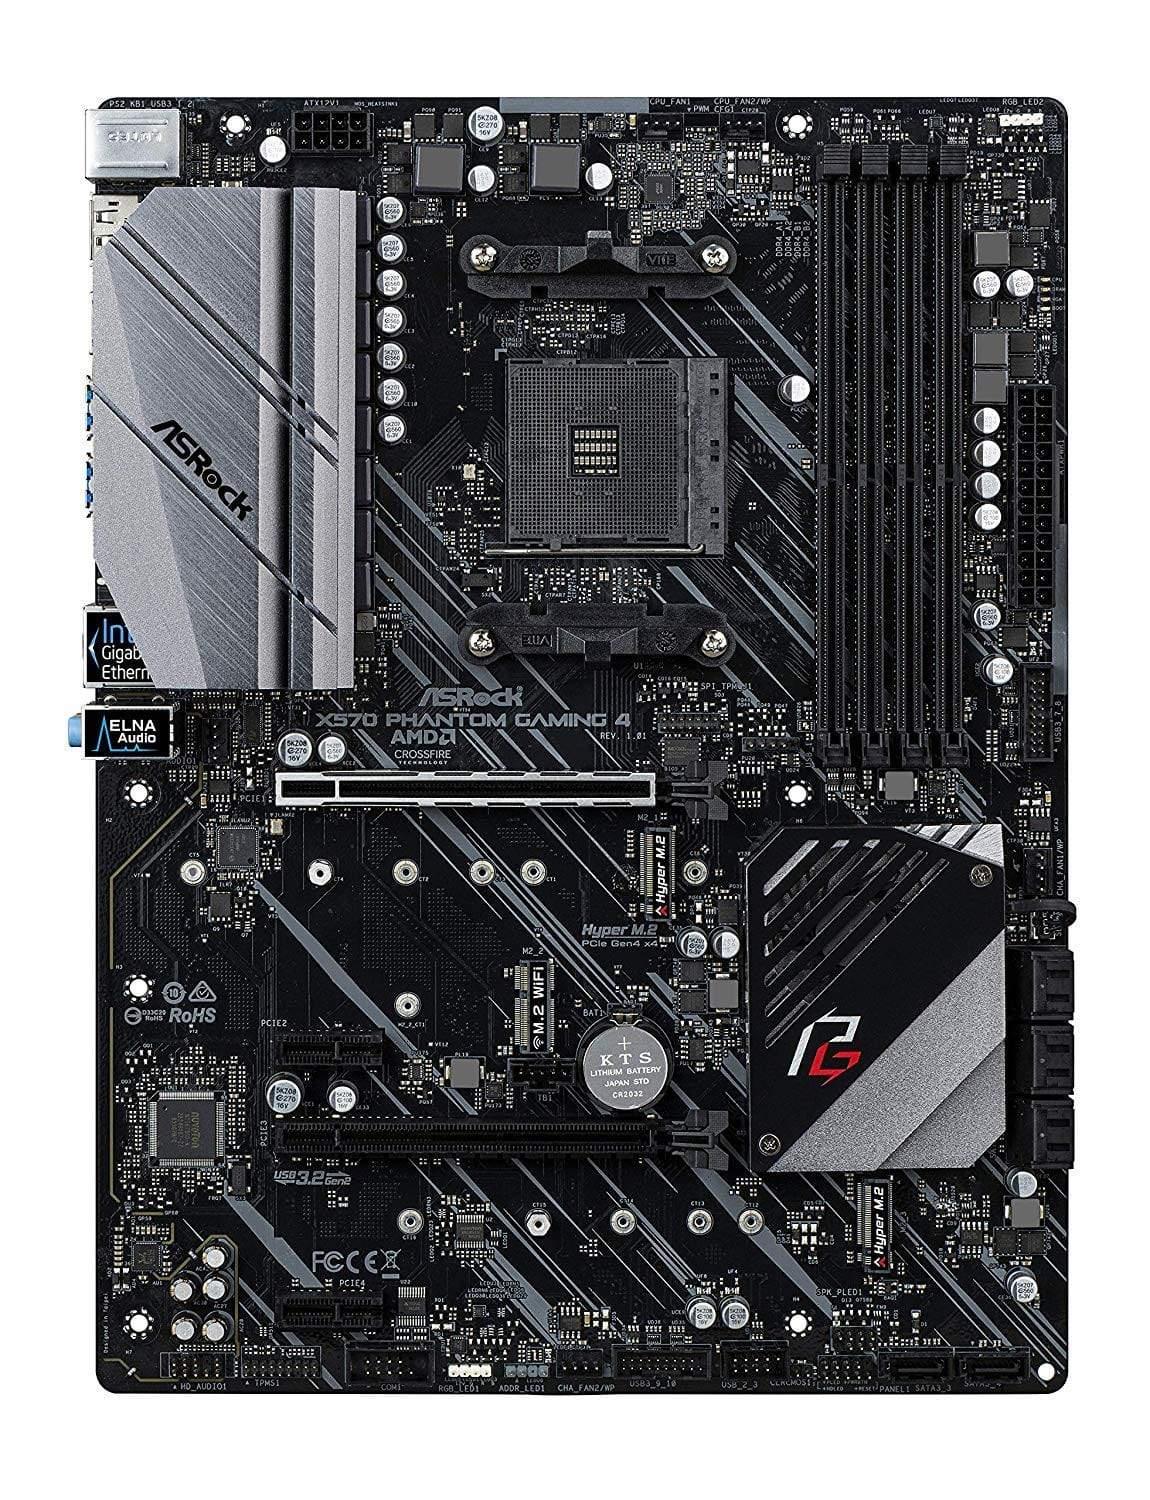 ASRock X570 Phantom Gaming 4 ATX Motherboard for AMD AM4 CPUs-Mother Boards-dealsplant